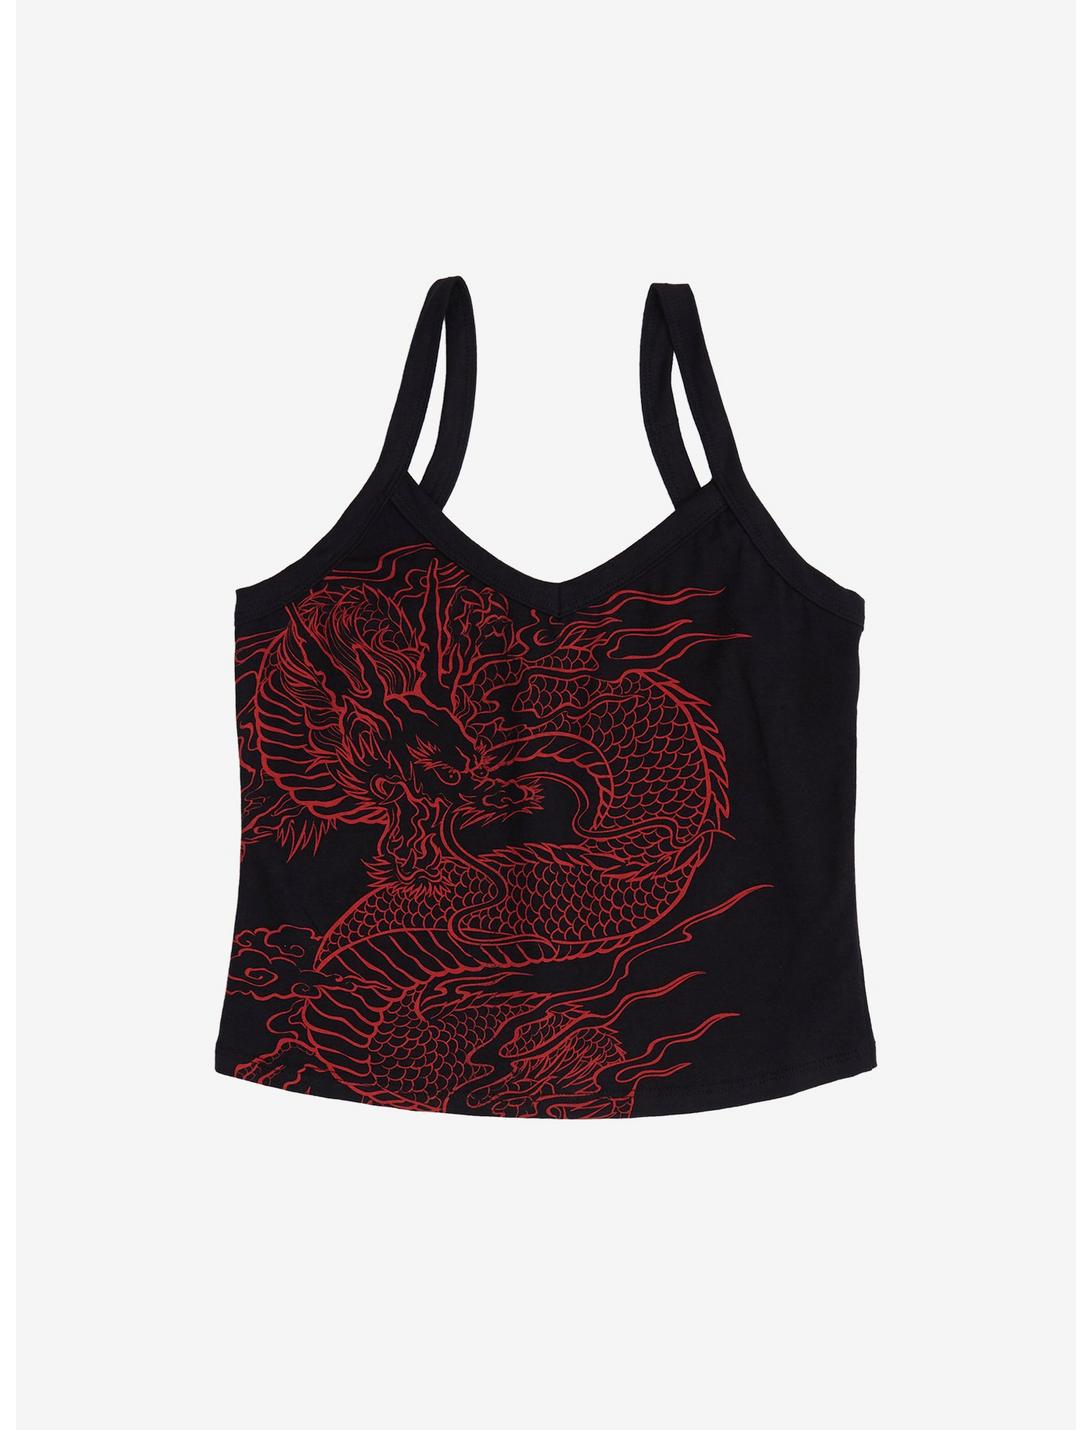 Red Dragon Girls Strappy Tank Top Plus Size, RED, hi-res